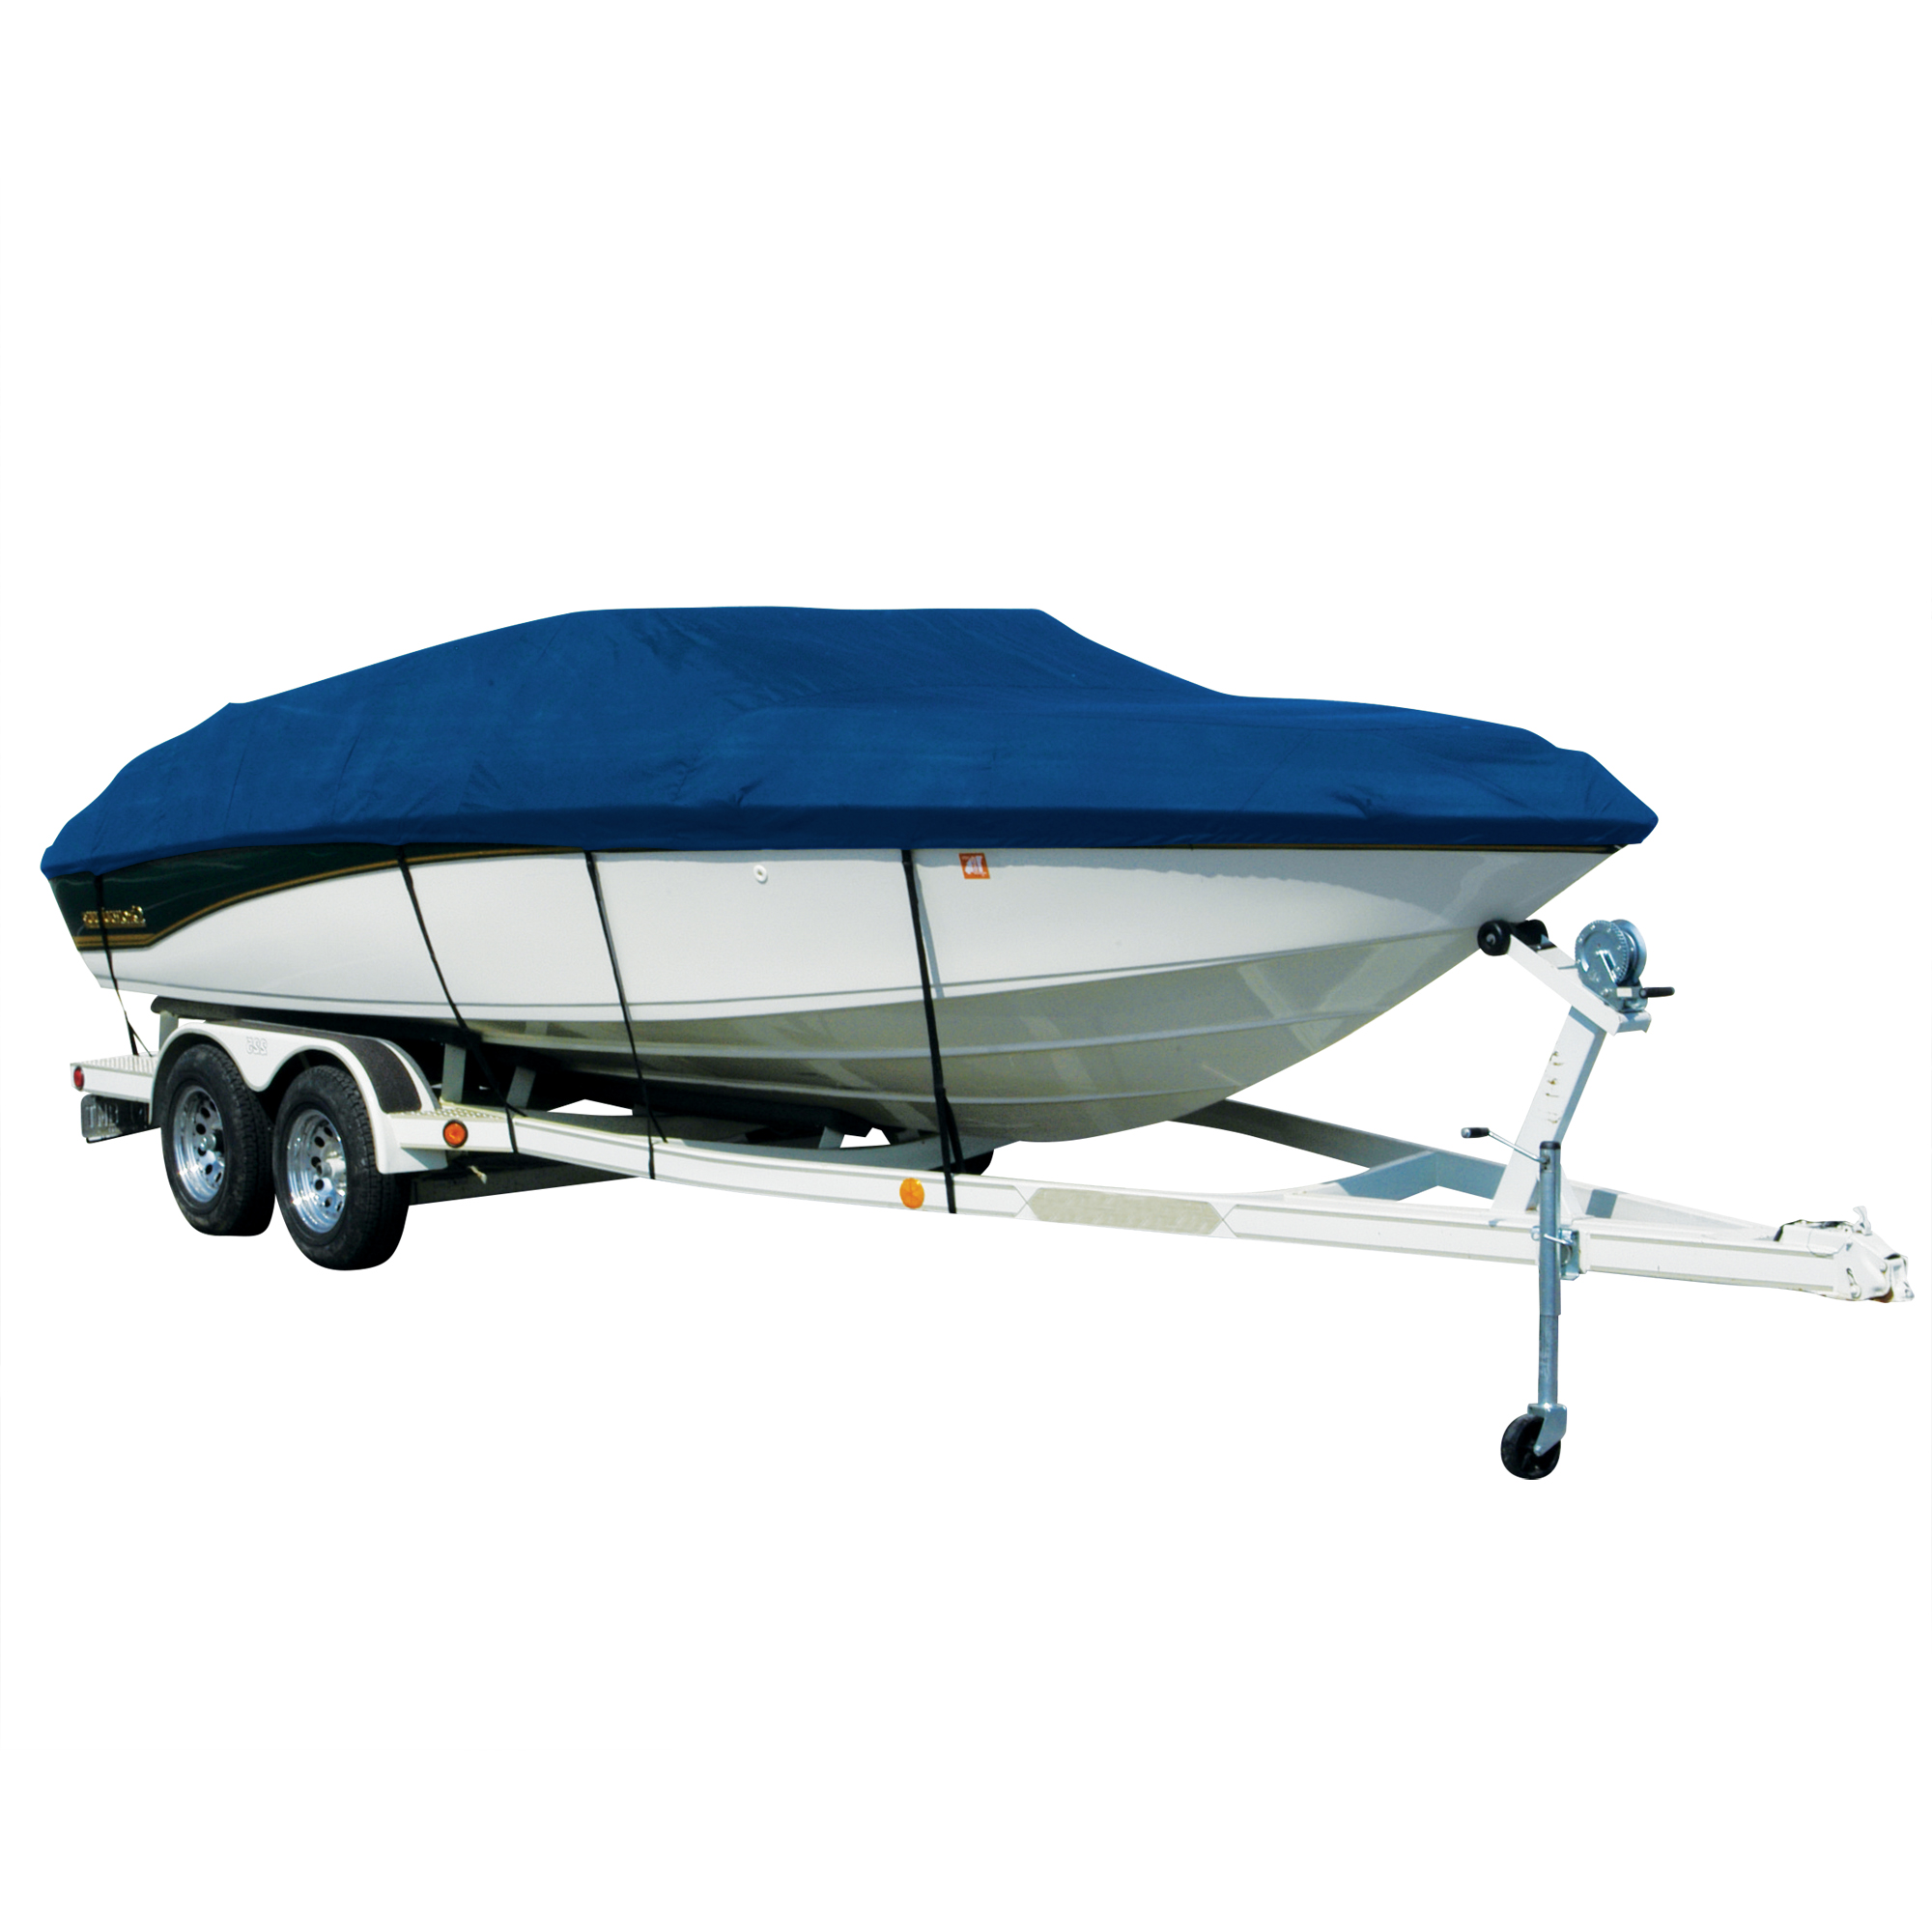 GREAT QUALITY BOAT COVER BAYLINER CAPRI 1851 CB CLOSED BOW I/O 92 